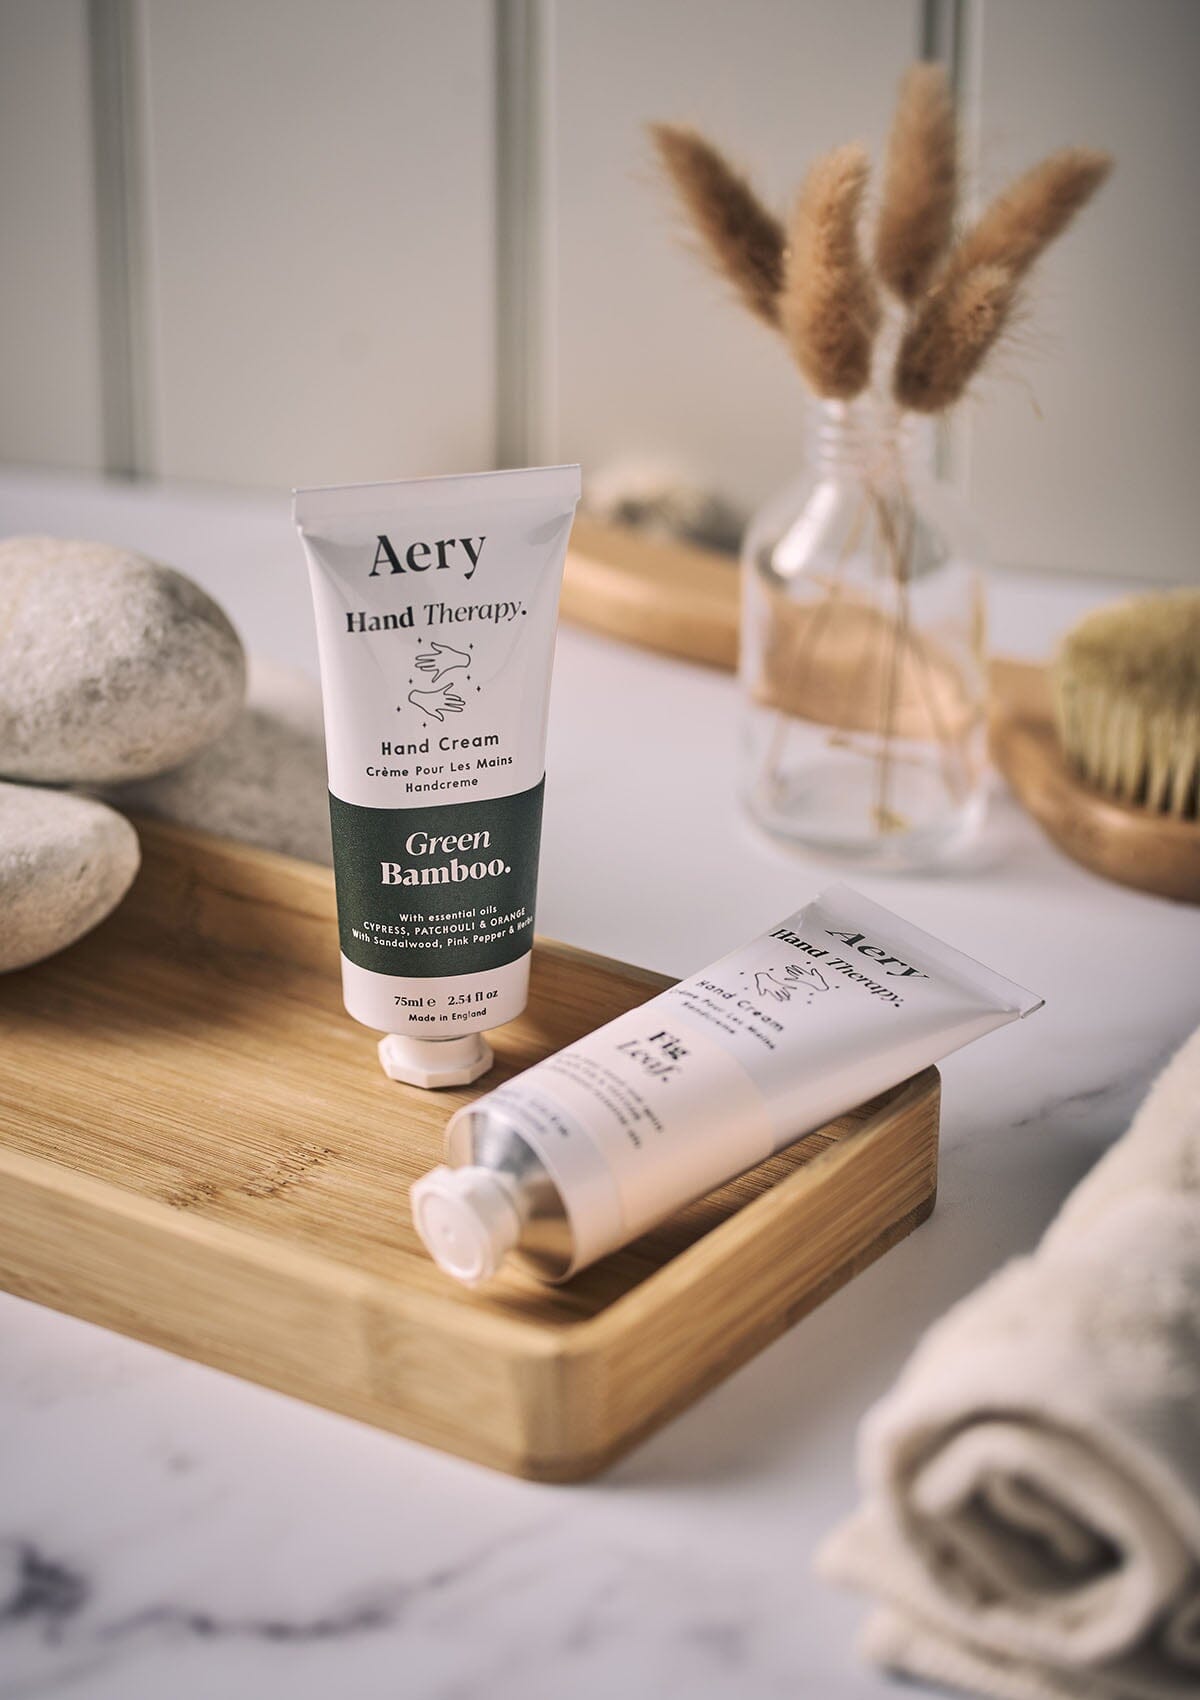 Fig Leaf hand cream by Aery displayed next to Green Bamboo hand cream displayed on wooden tray in bathroom 